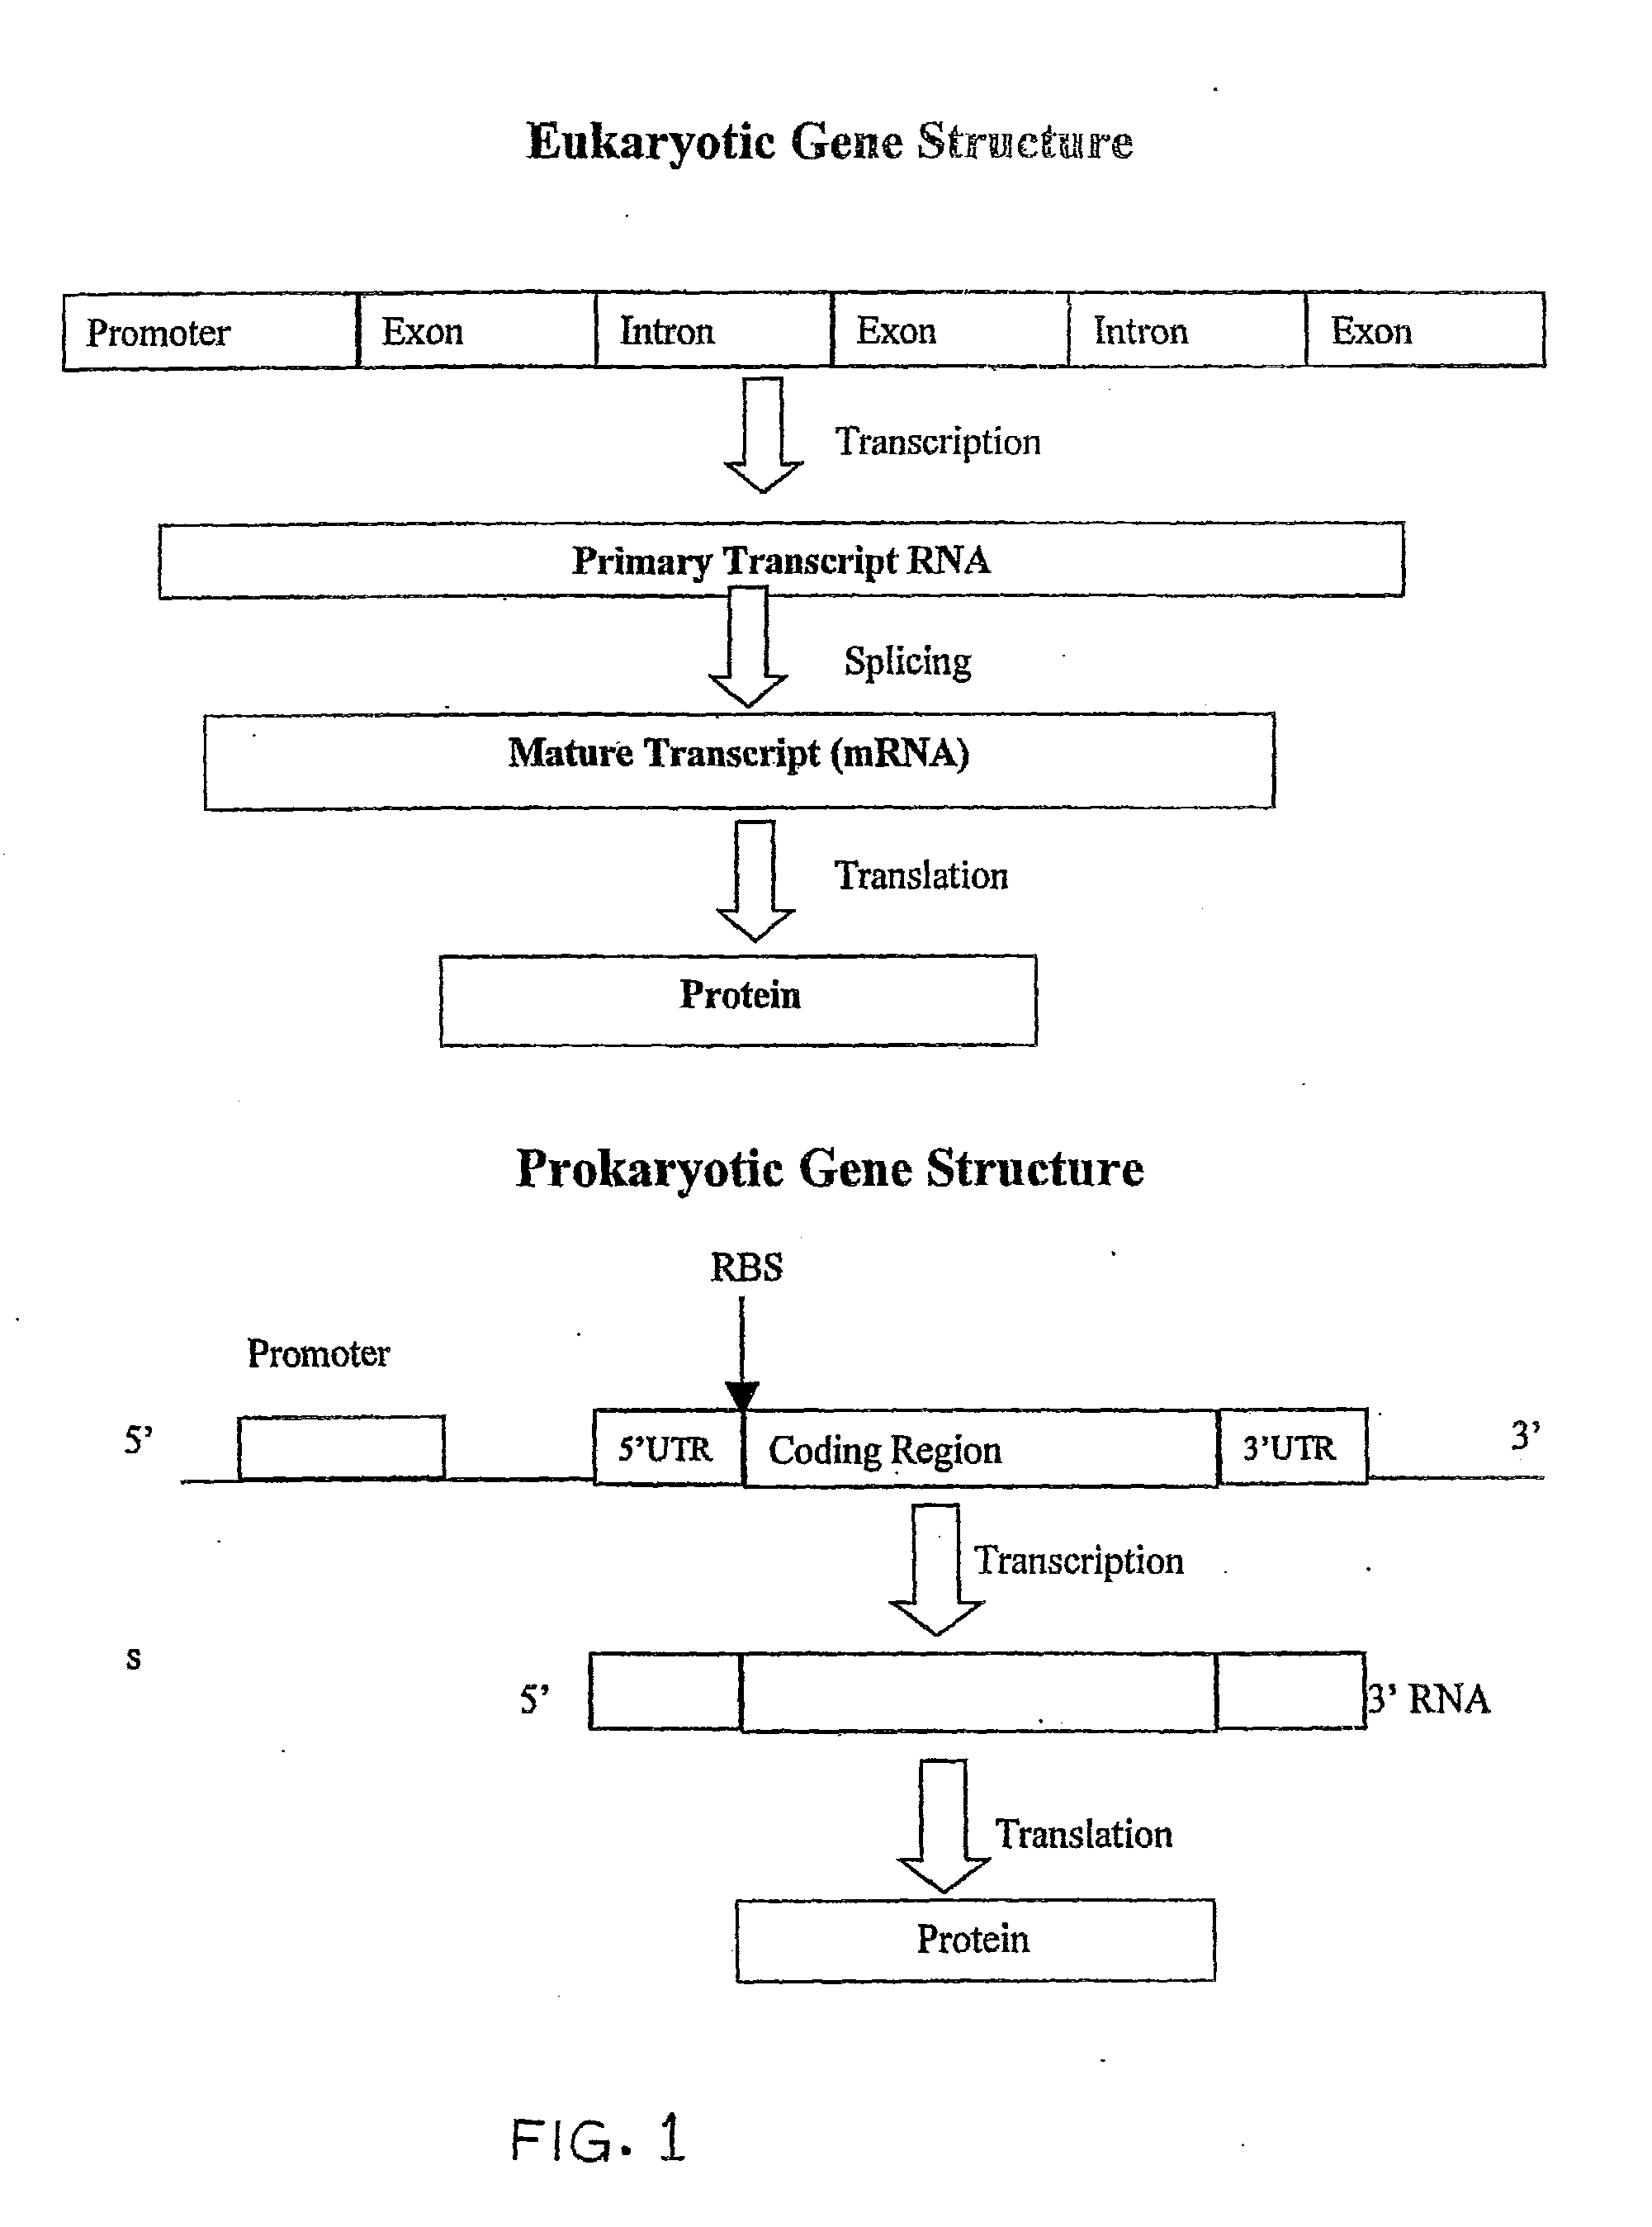 System and method for analysis of a DNA sequence by converting the DNA sequence to a number string and applications thereof in the field of accelerated drug design